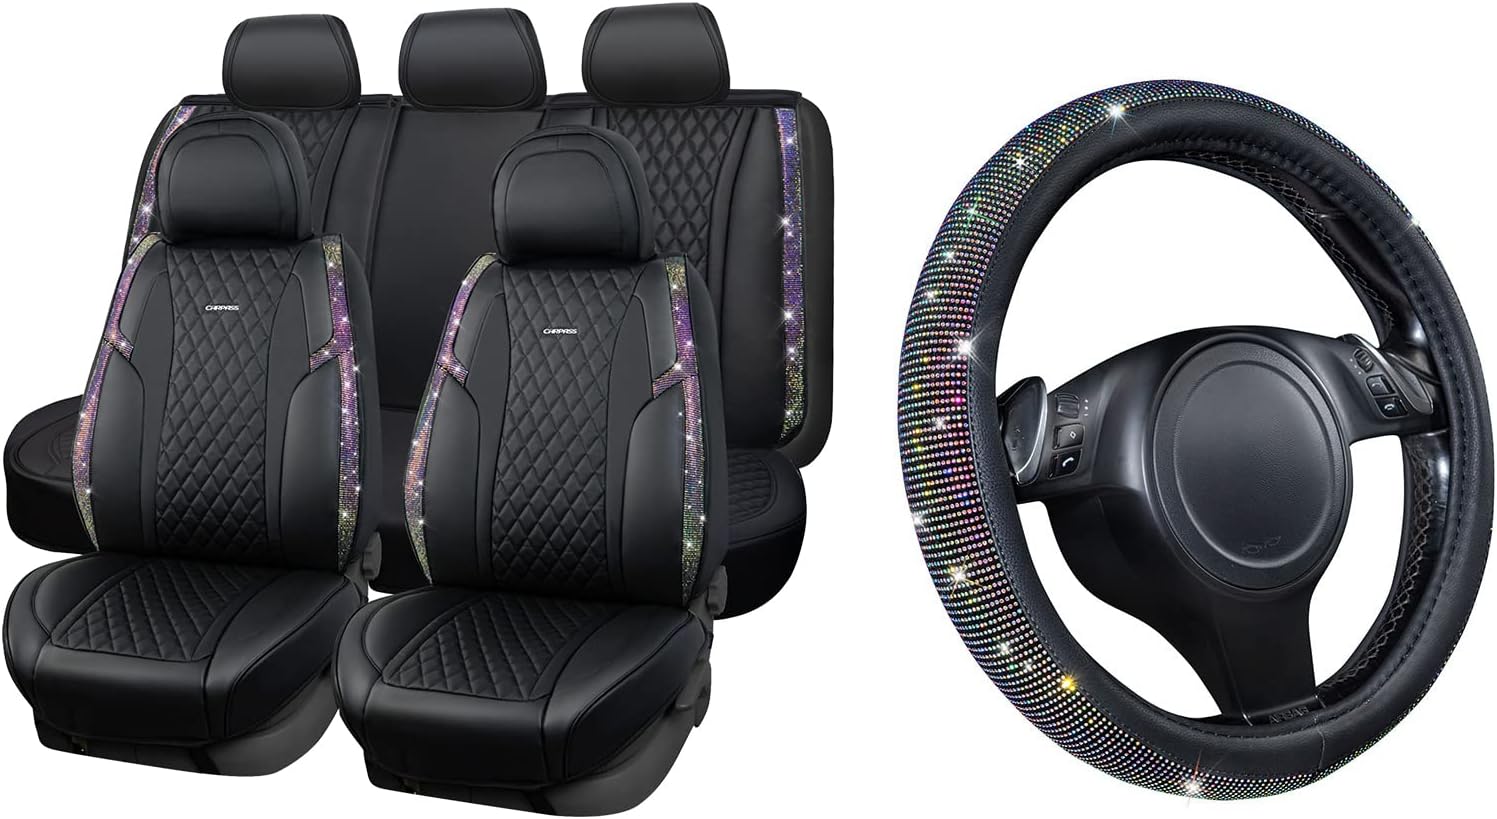 CAR PASS Diamond Leather Steering Wheel Cover & Iridescent Diamond &Nappa Calfskin Leather Cushioned,Bling seat Covers Fit for Auto SUV Sedan,Sparkly Glitter Shining Rhinestone, Multicolor